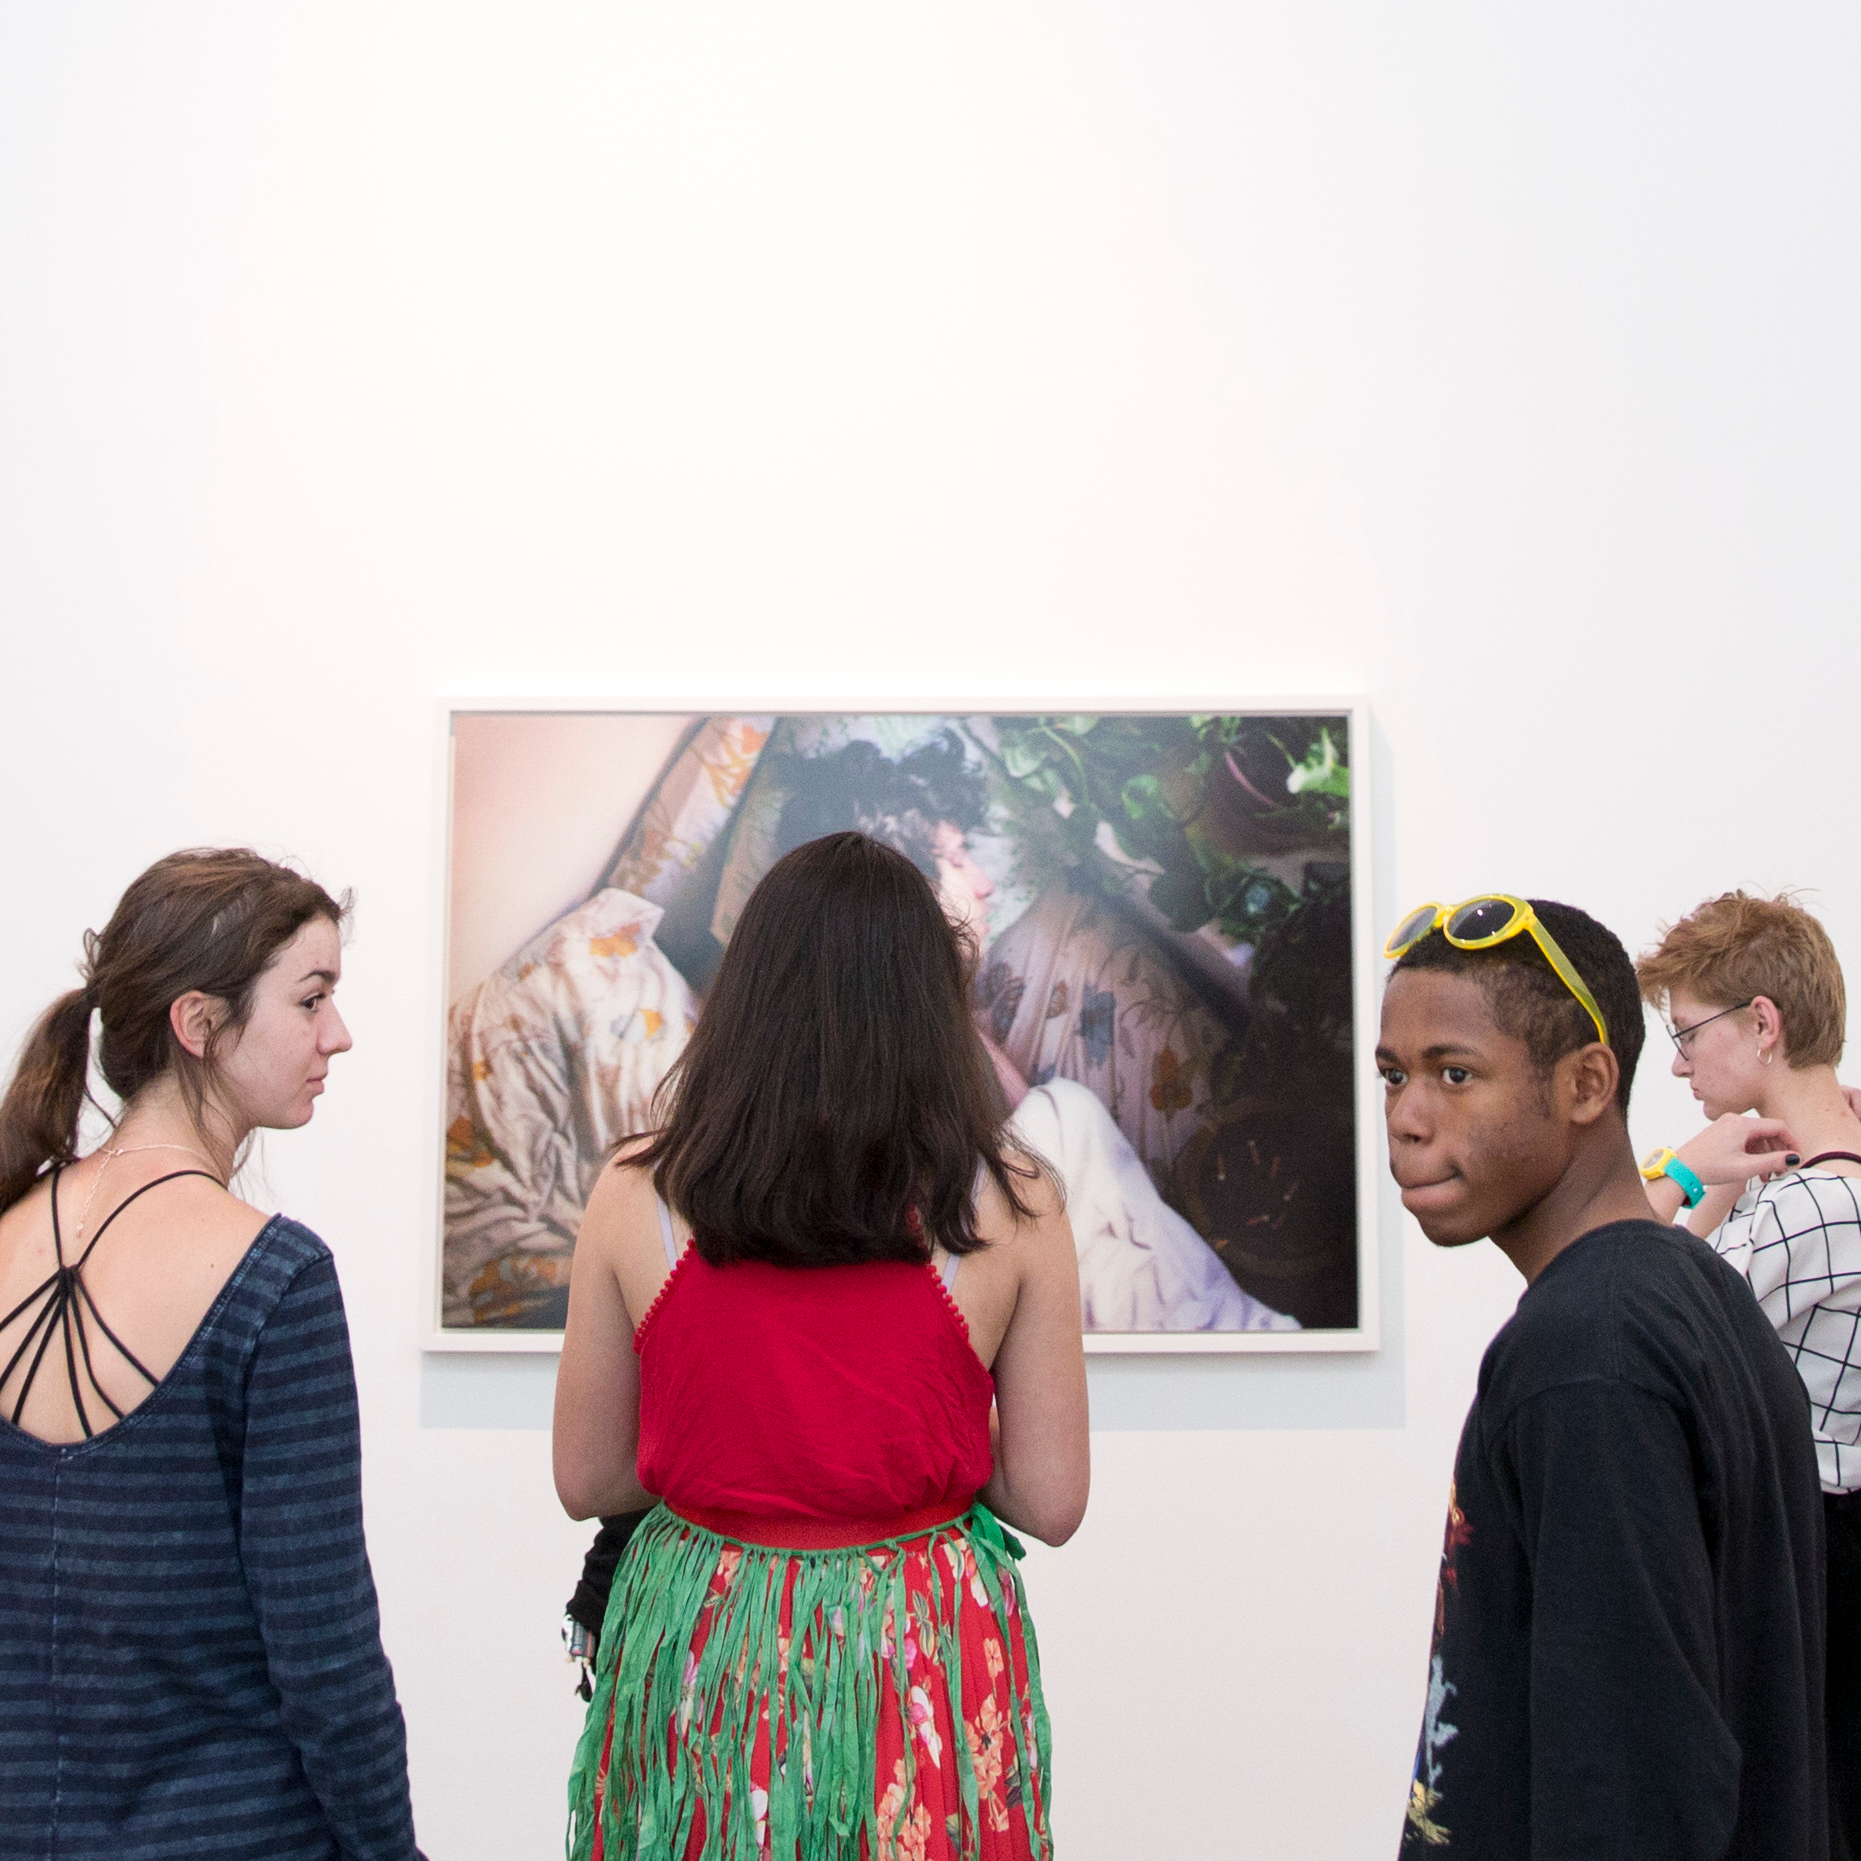 Four visitors looking at a photograph hung on a white gallery wall.